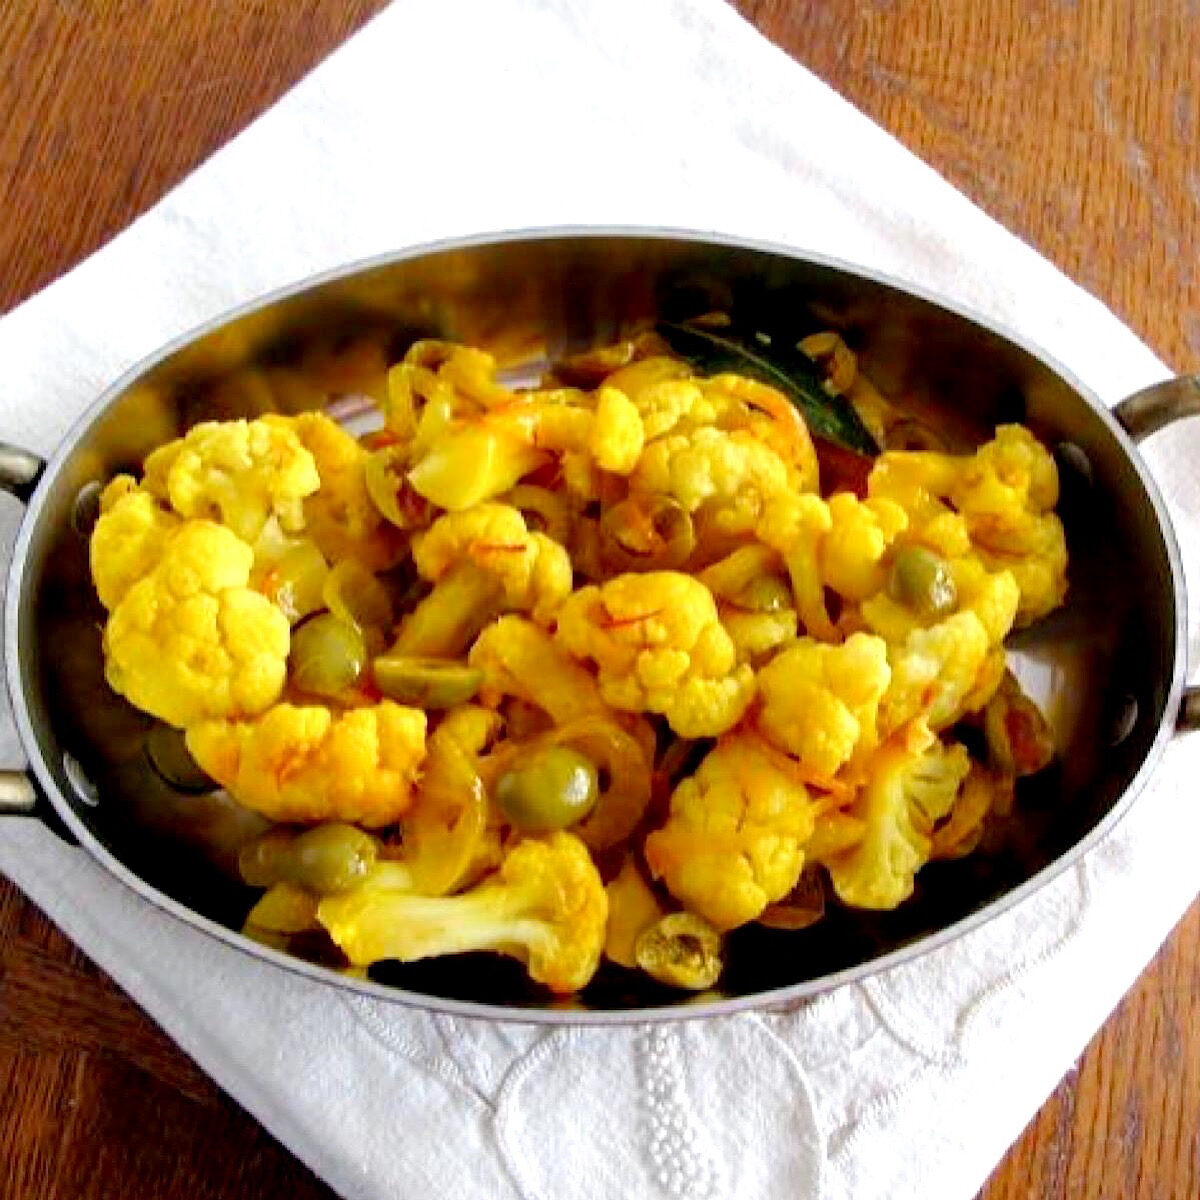 Baked cauliflower with saffron and olives in copper baking dish.